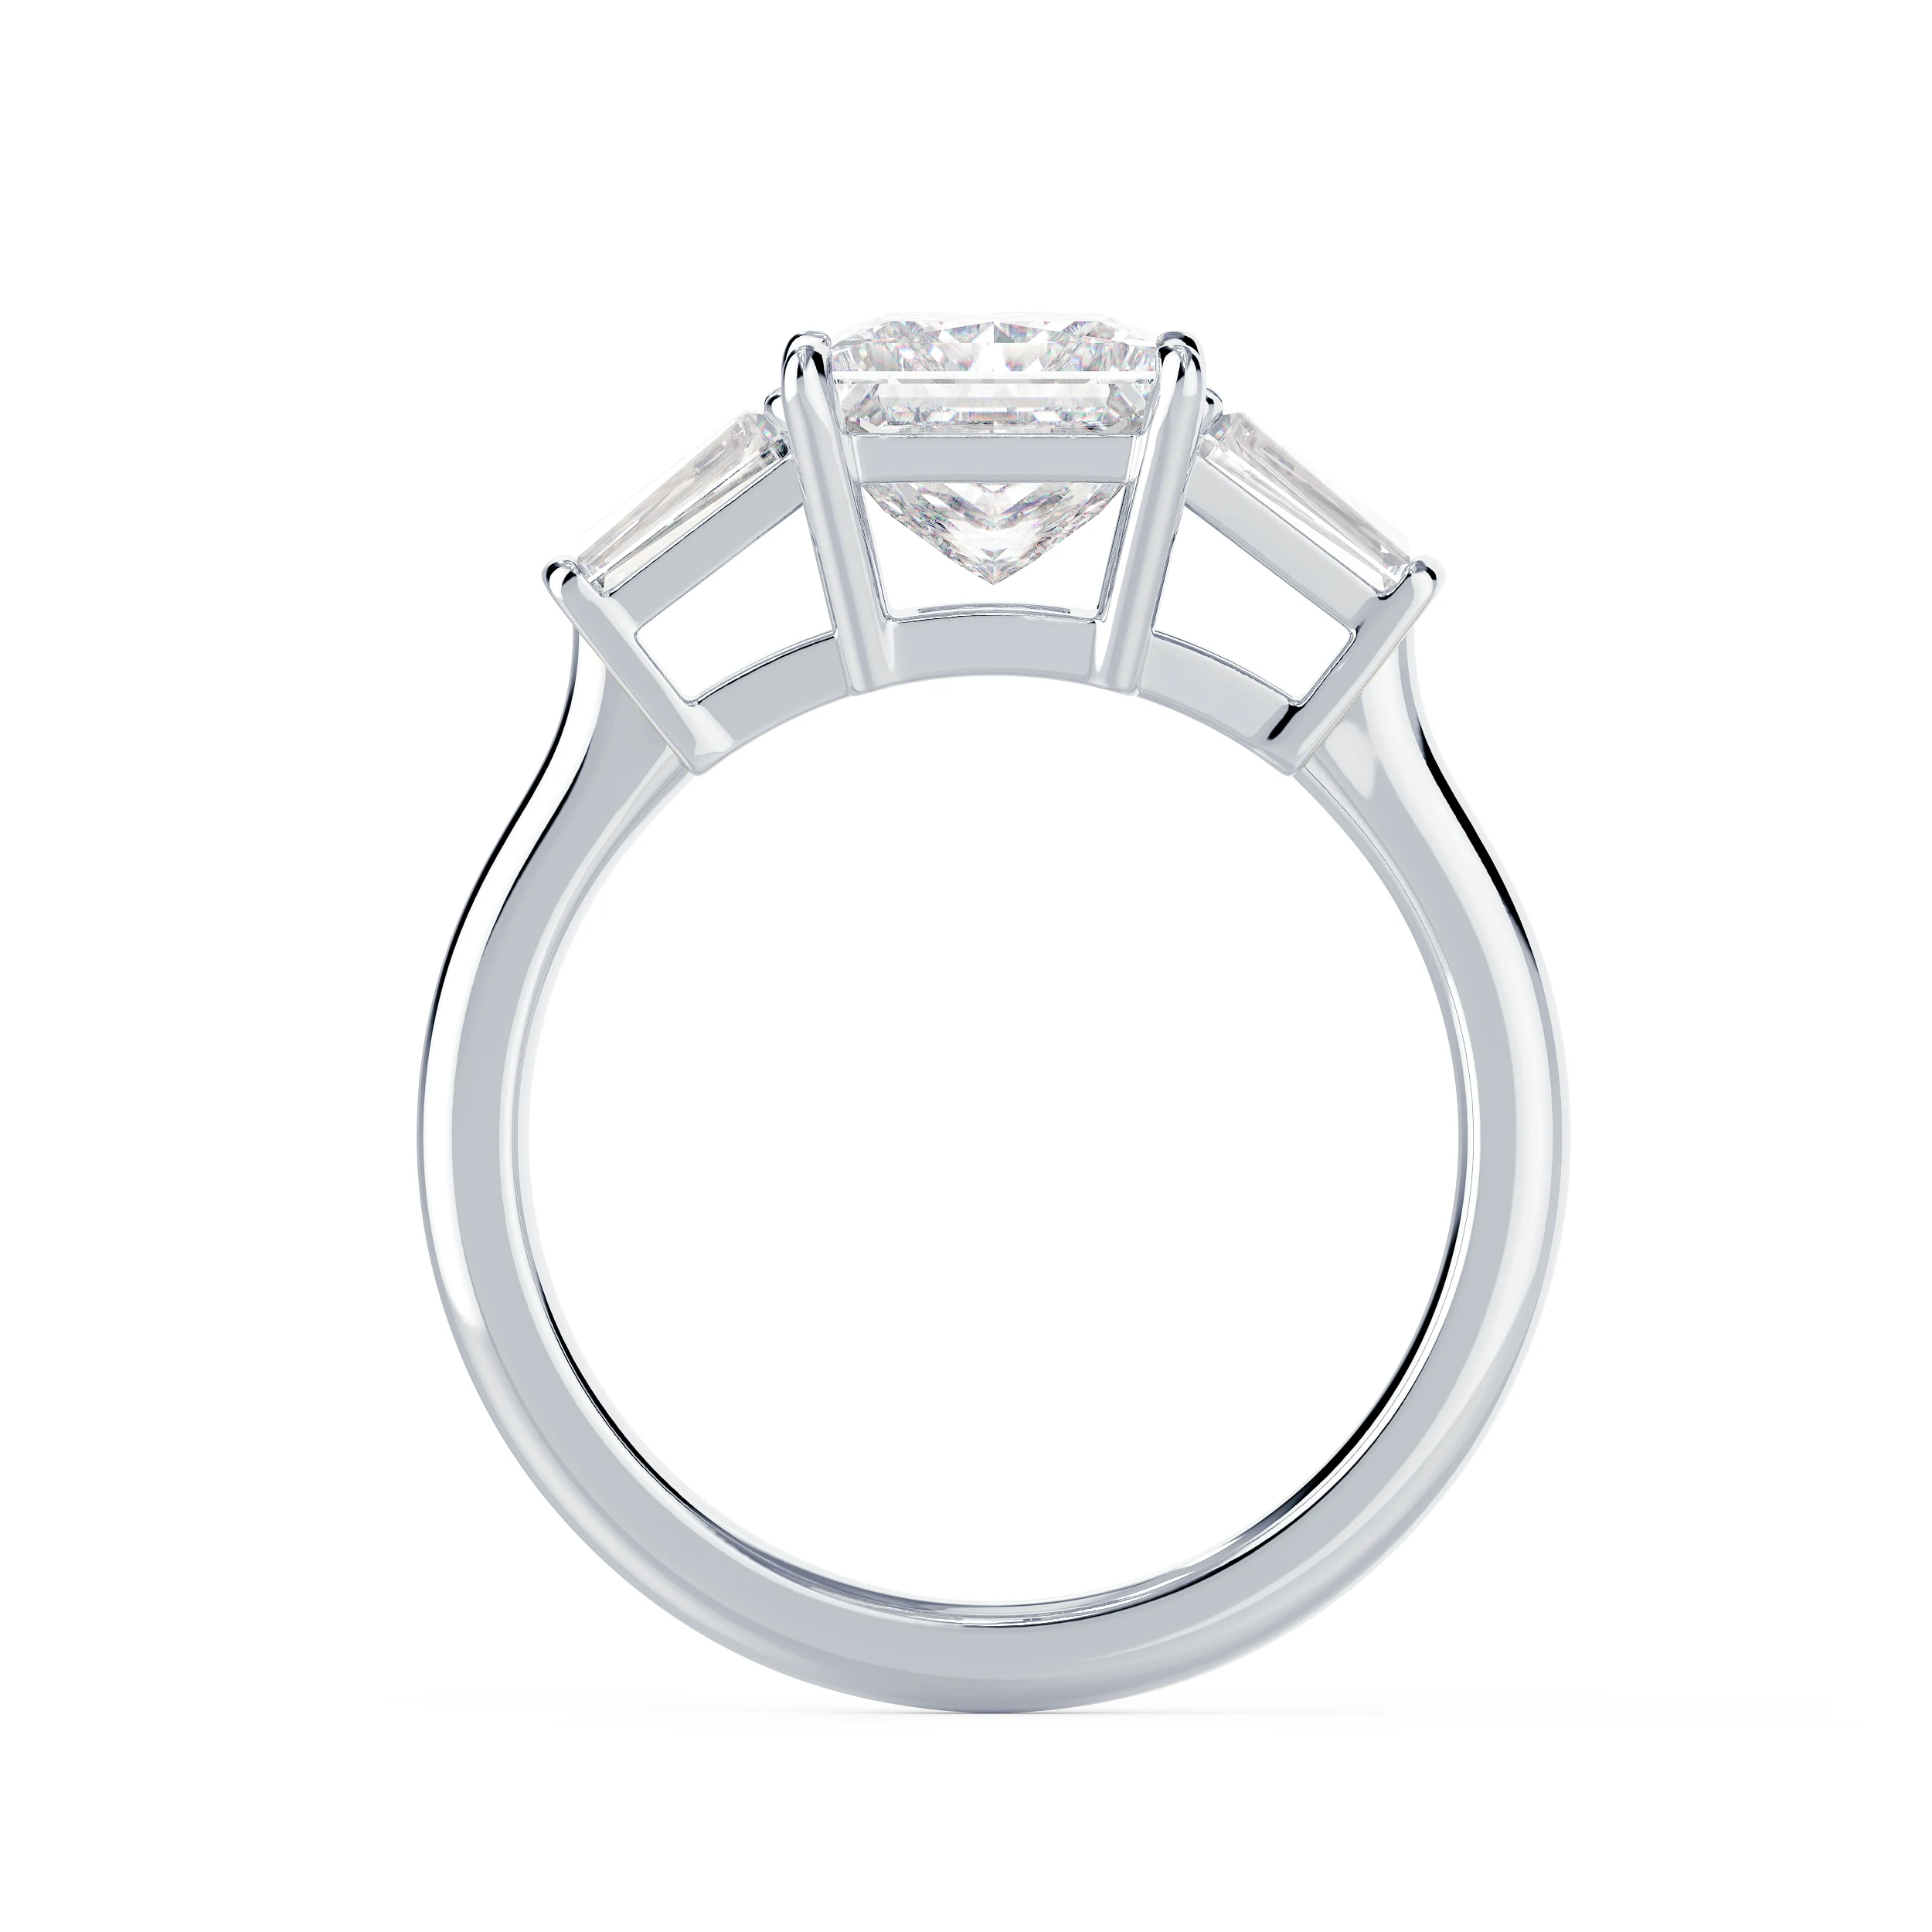 Hand Selected Lab Diamonds set in White Gold Princess and Baguette Diamond Engagement Ring (Profile View)